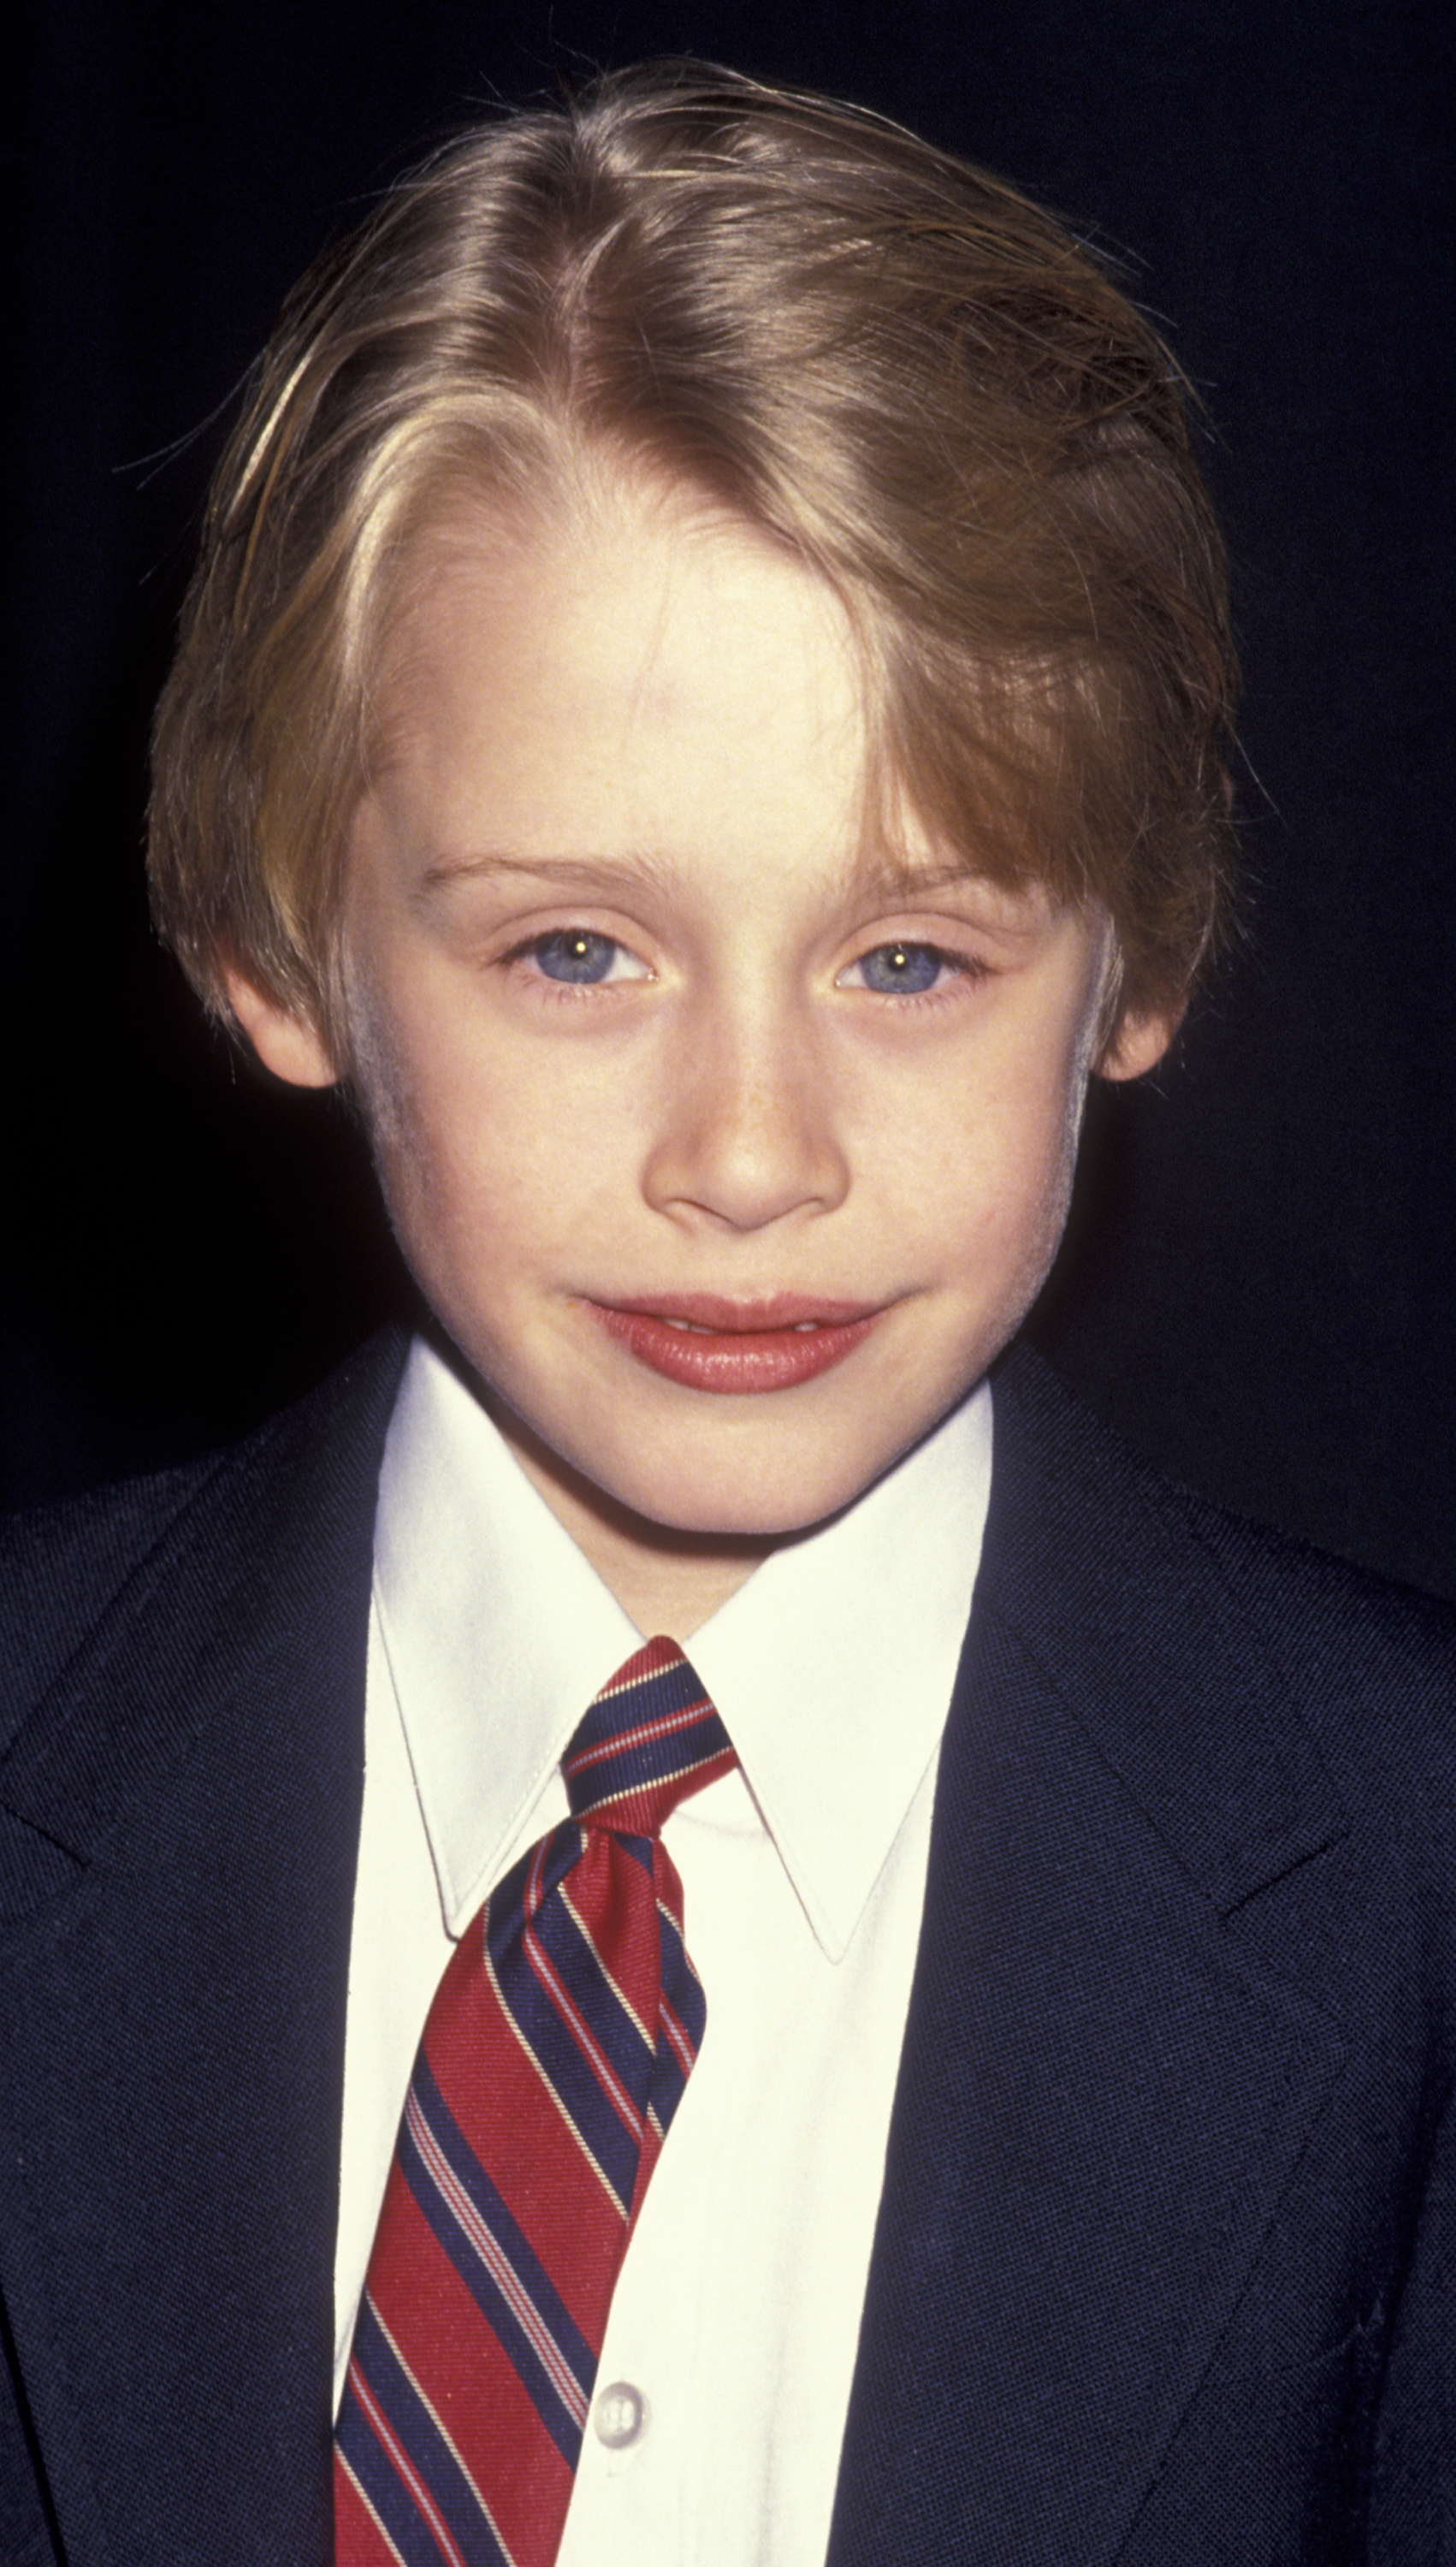 Macaulay Culkin at the 62nd Annual National Board of Review Awards in New York City on March 4, 1991 | Source: Getty Images